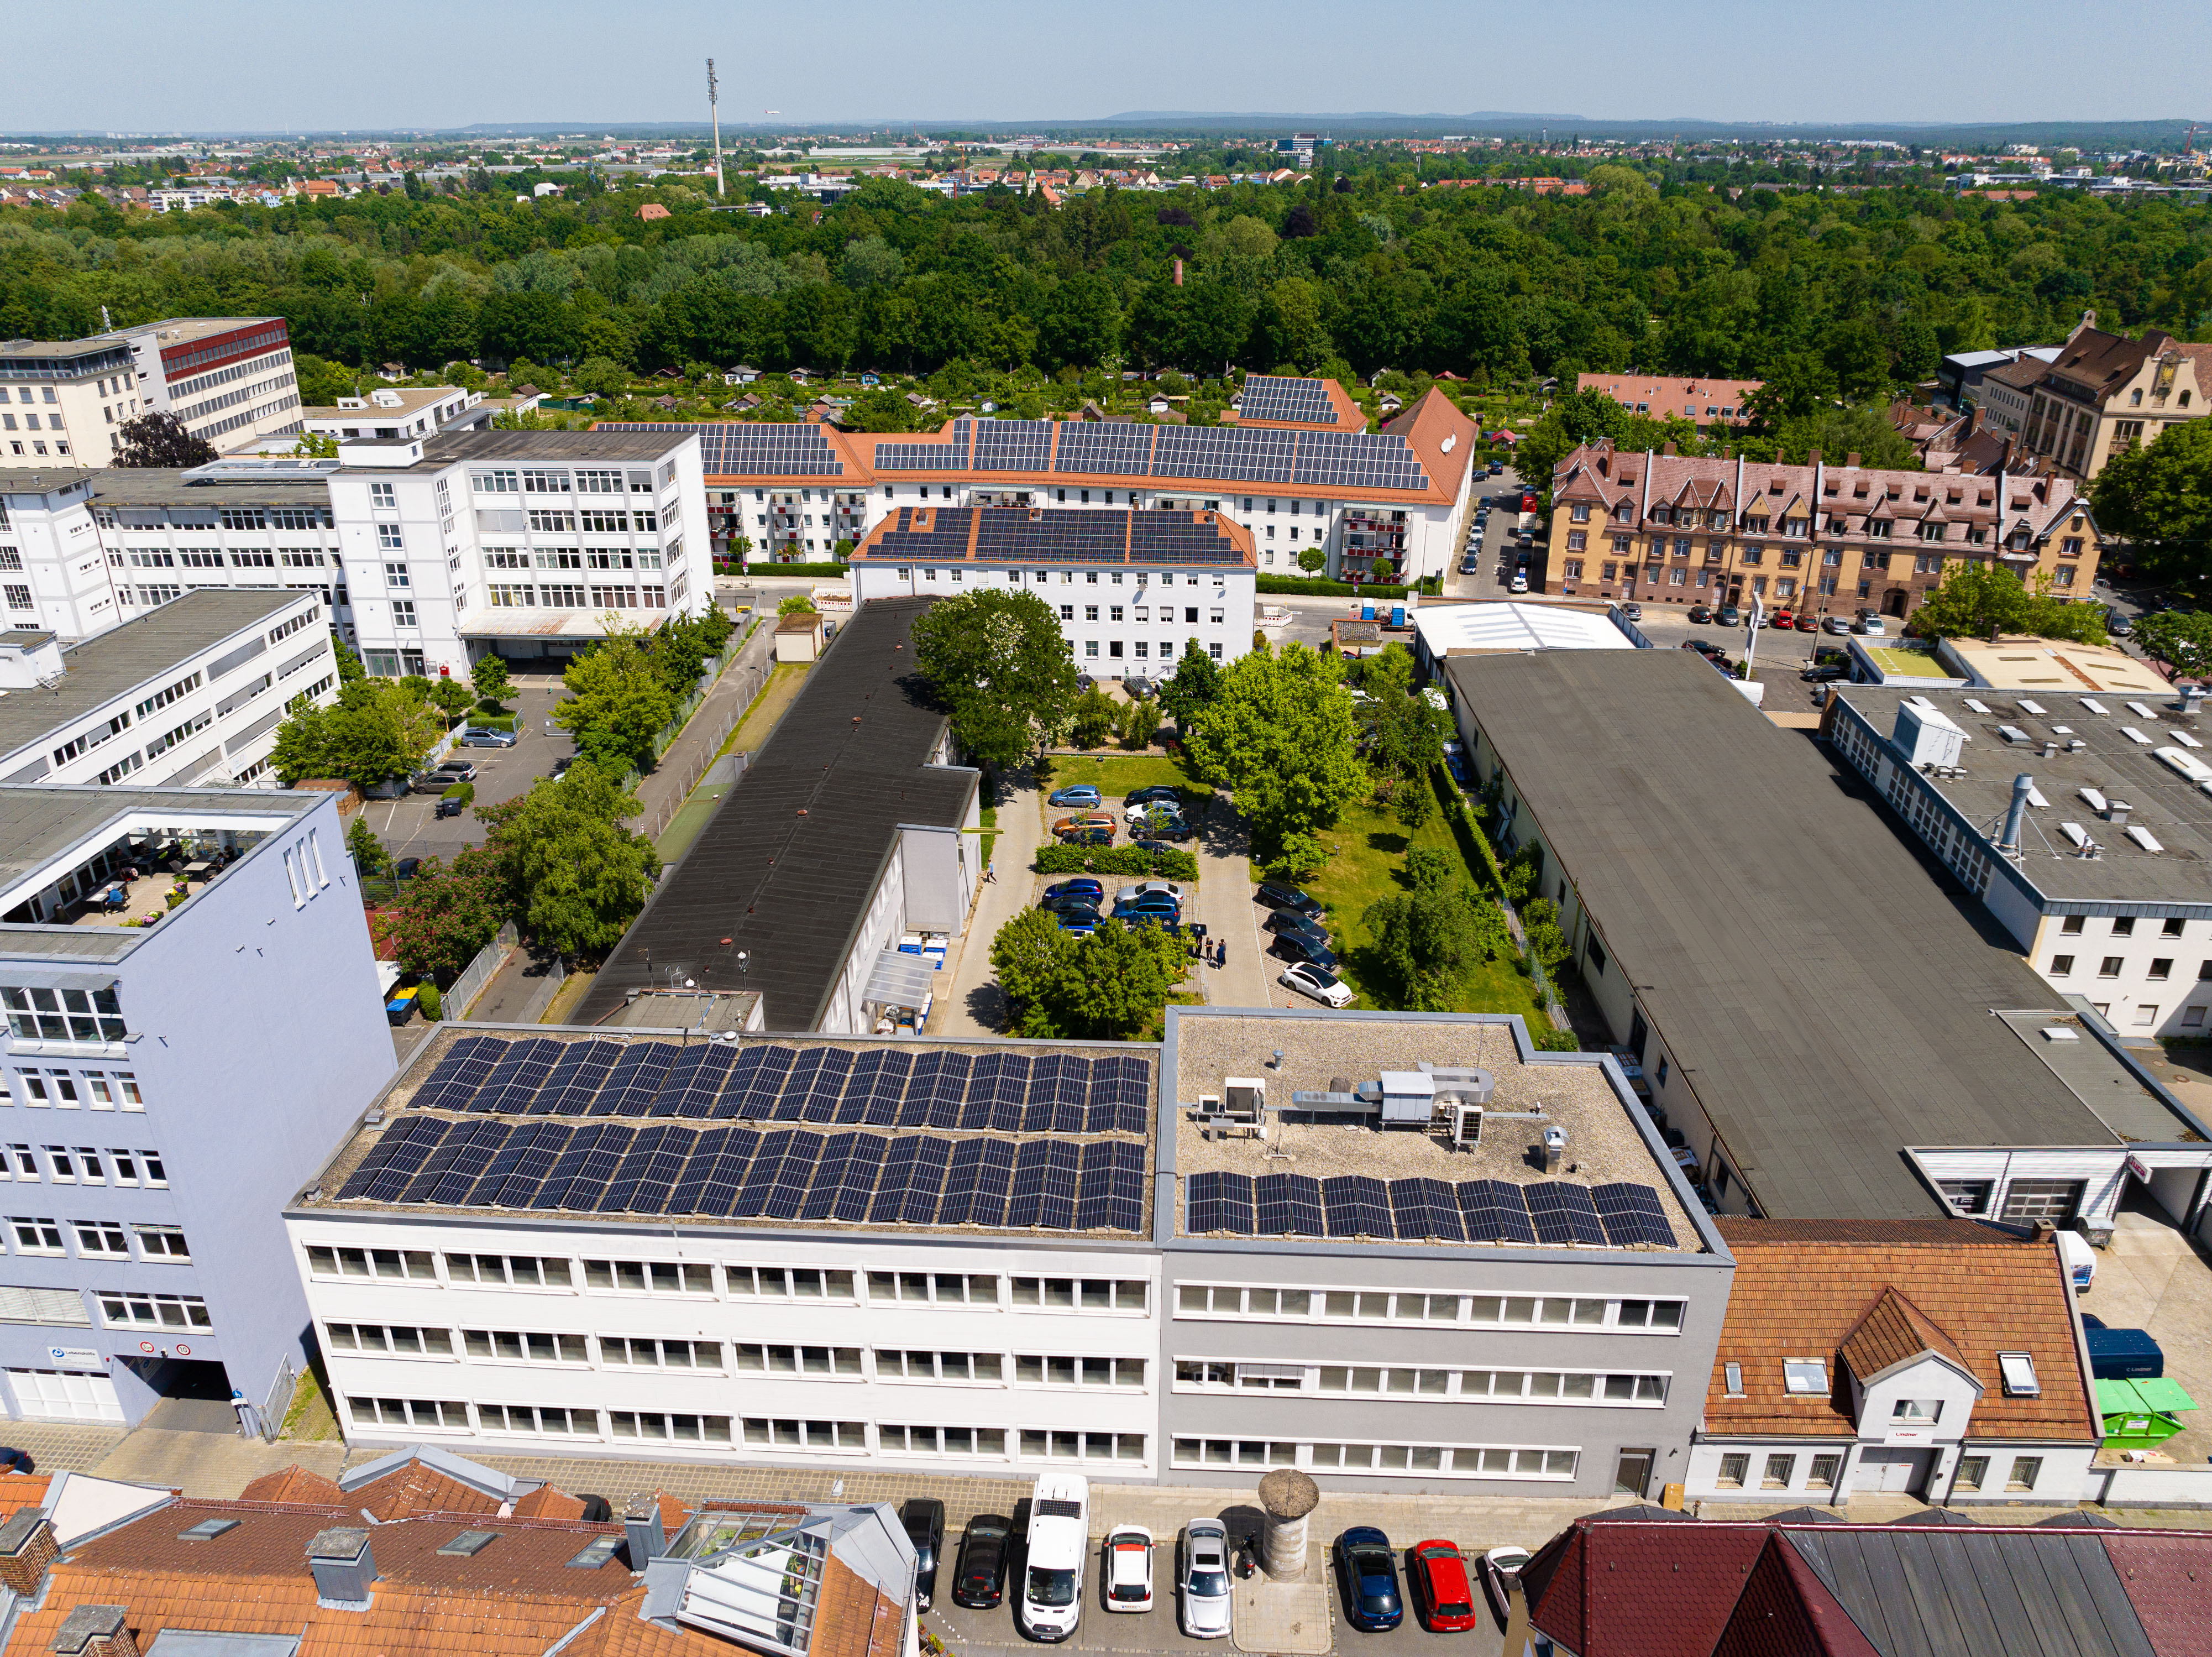 The image shows a drone view from the headquarters of Noris Group Nuremberg